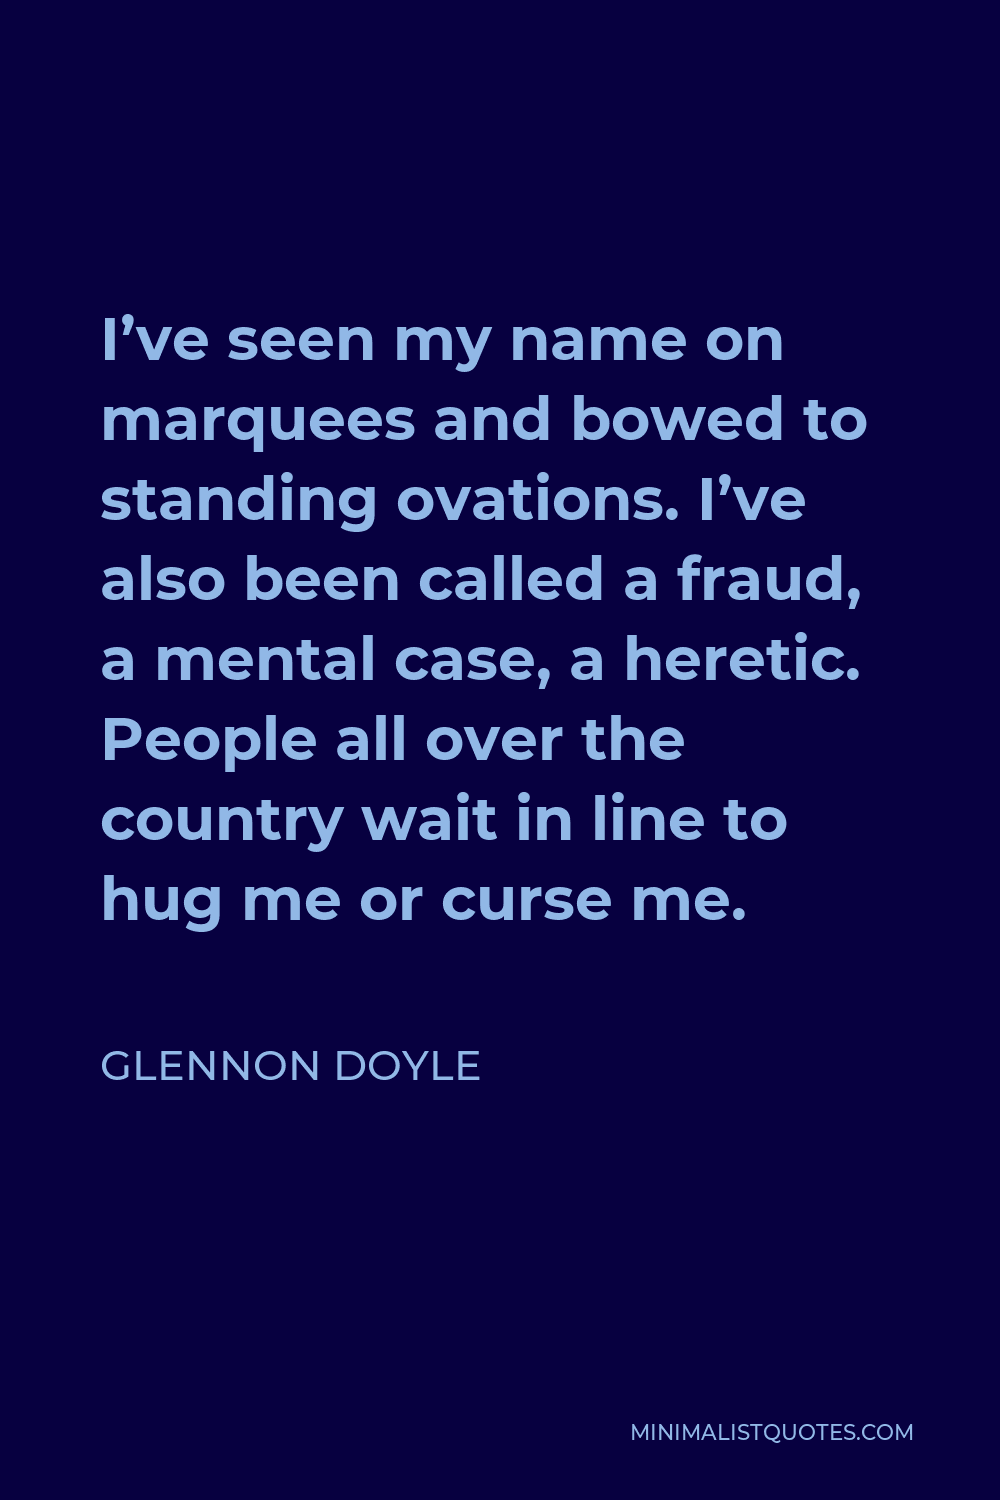 Glennon Doyle Quote - I’ve seen my name on marquees and bowed to standing ovations. I’ve also been called a fraud, a mental case, a heretic. People all over the country wait in line to hug me or curse me.